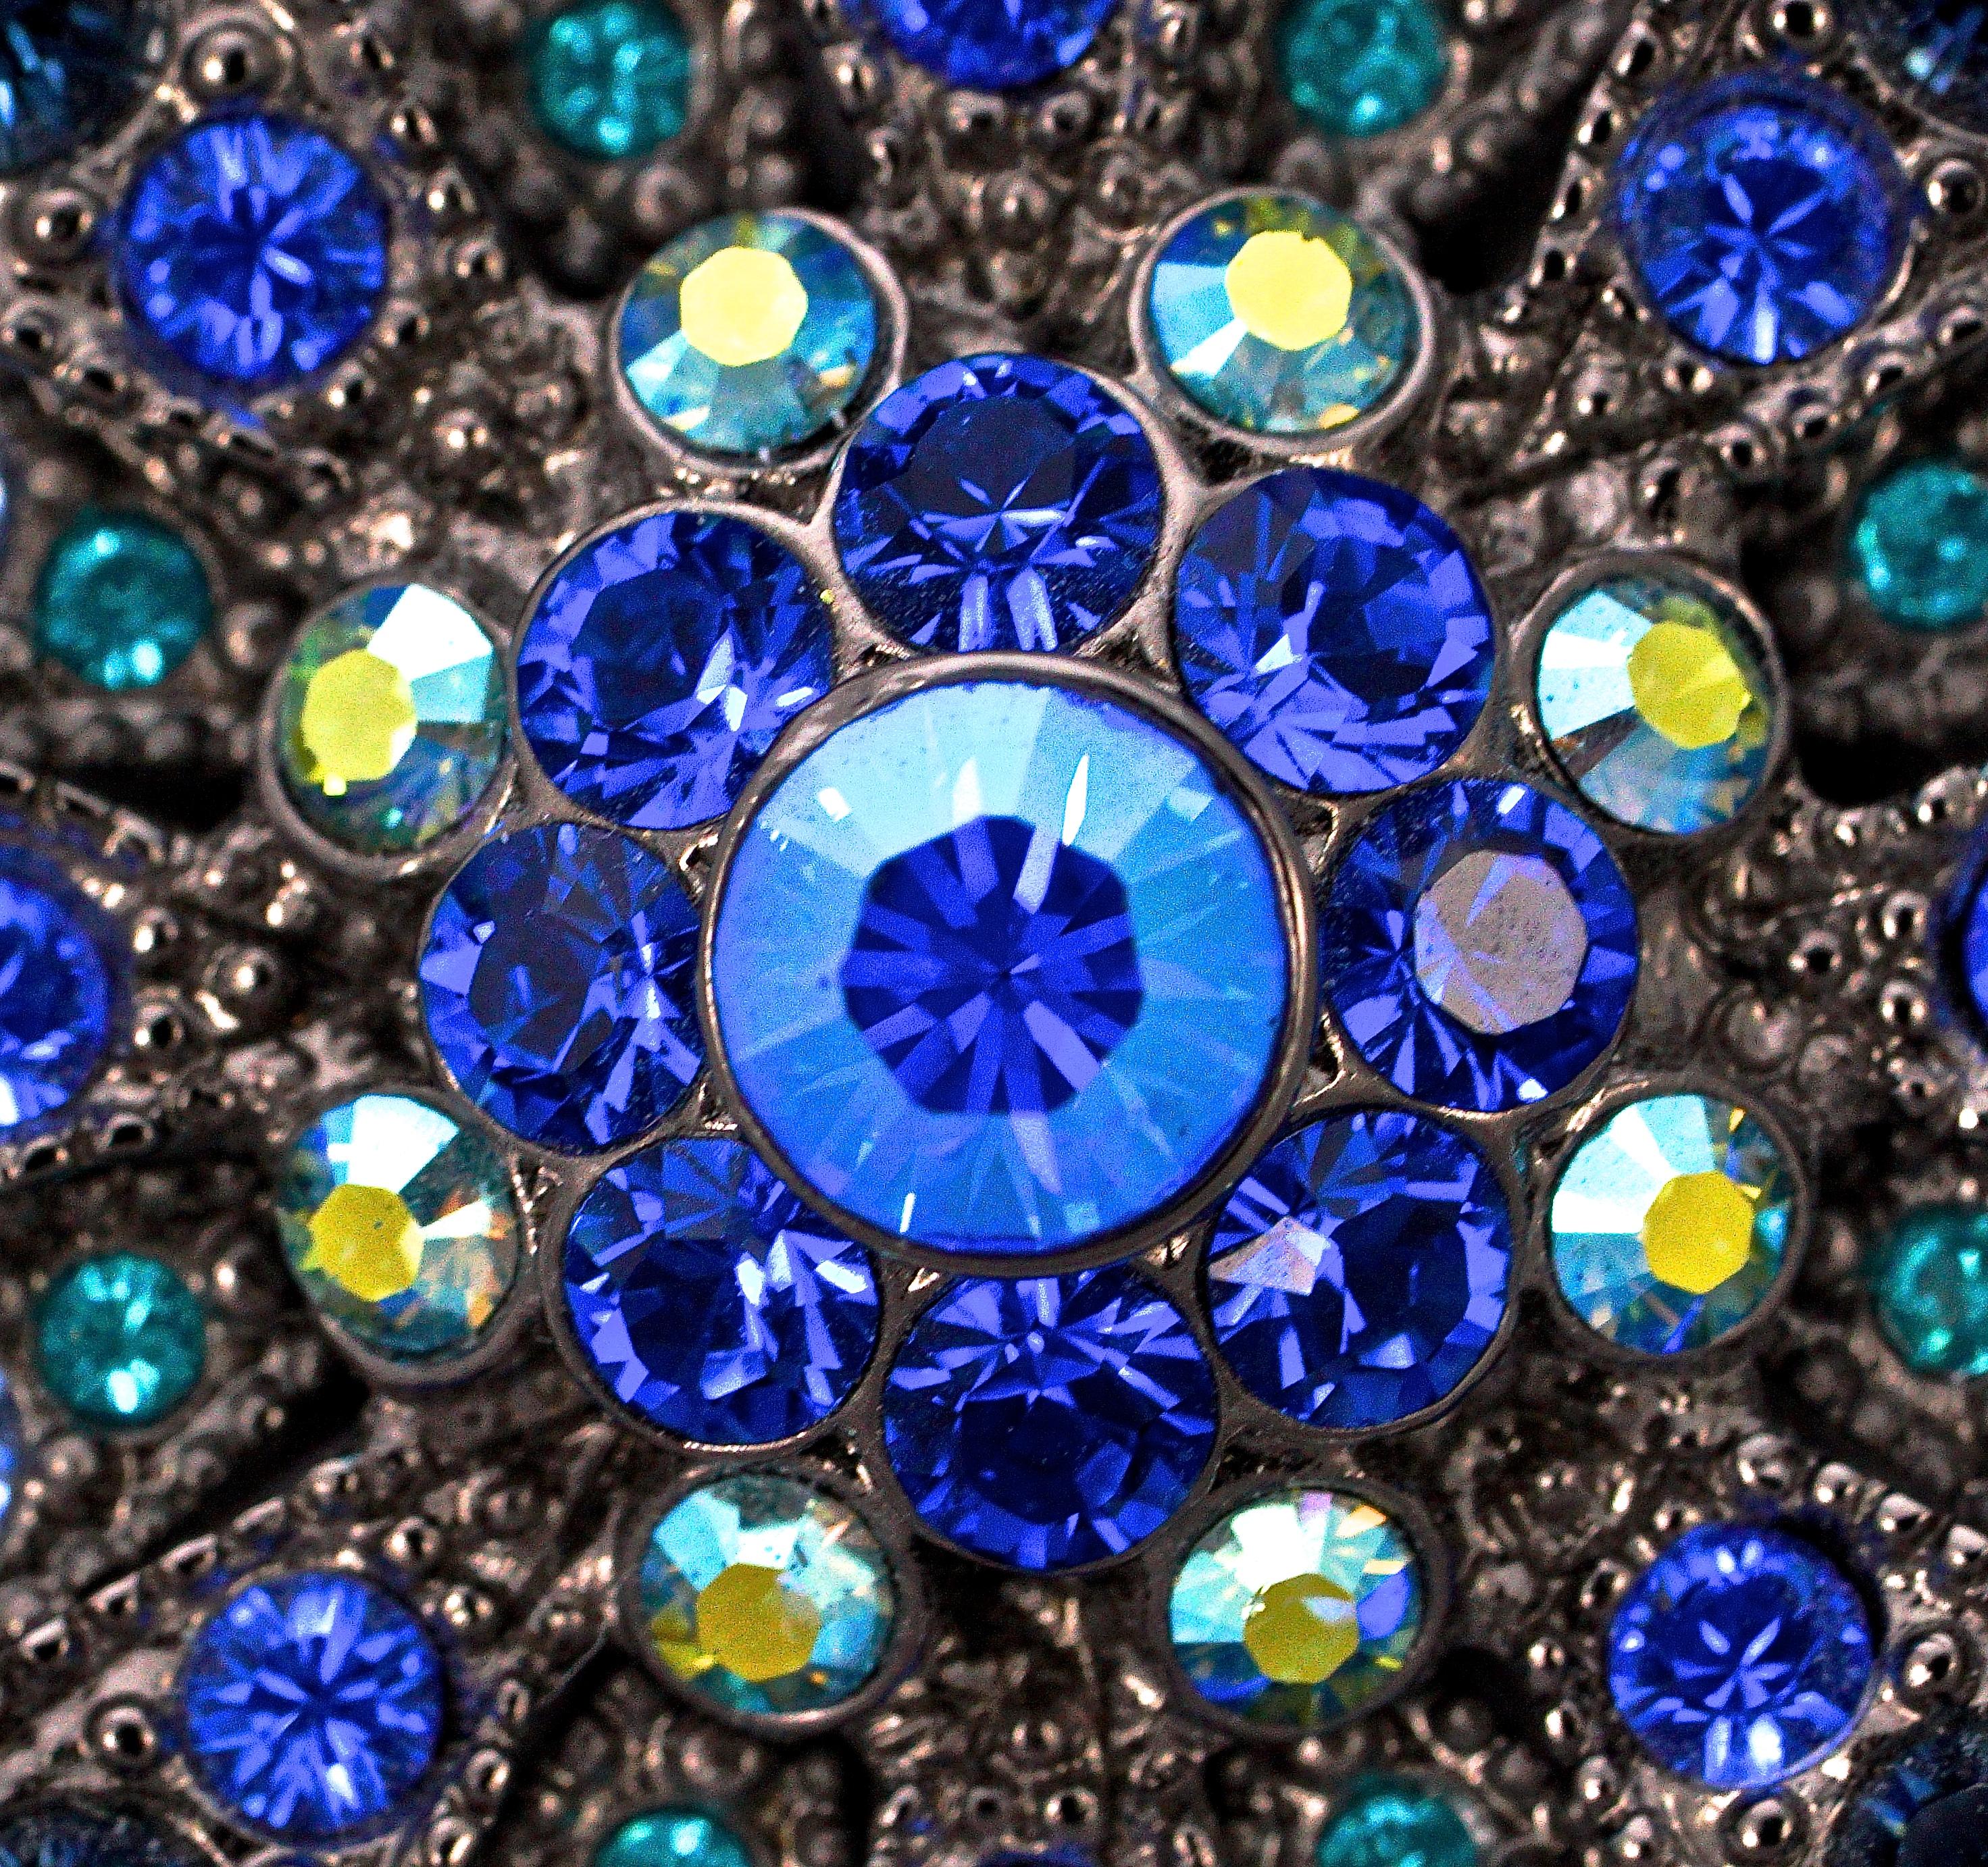 Joan Rivers large flower brooch embellished with blue and green plain and aurora borealis Swarovski crystals. Measuring diameter 5.8cm / 2.28 inches.

This is a beautiful and sparkling vintage statement brooch by Joan Rivers.